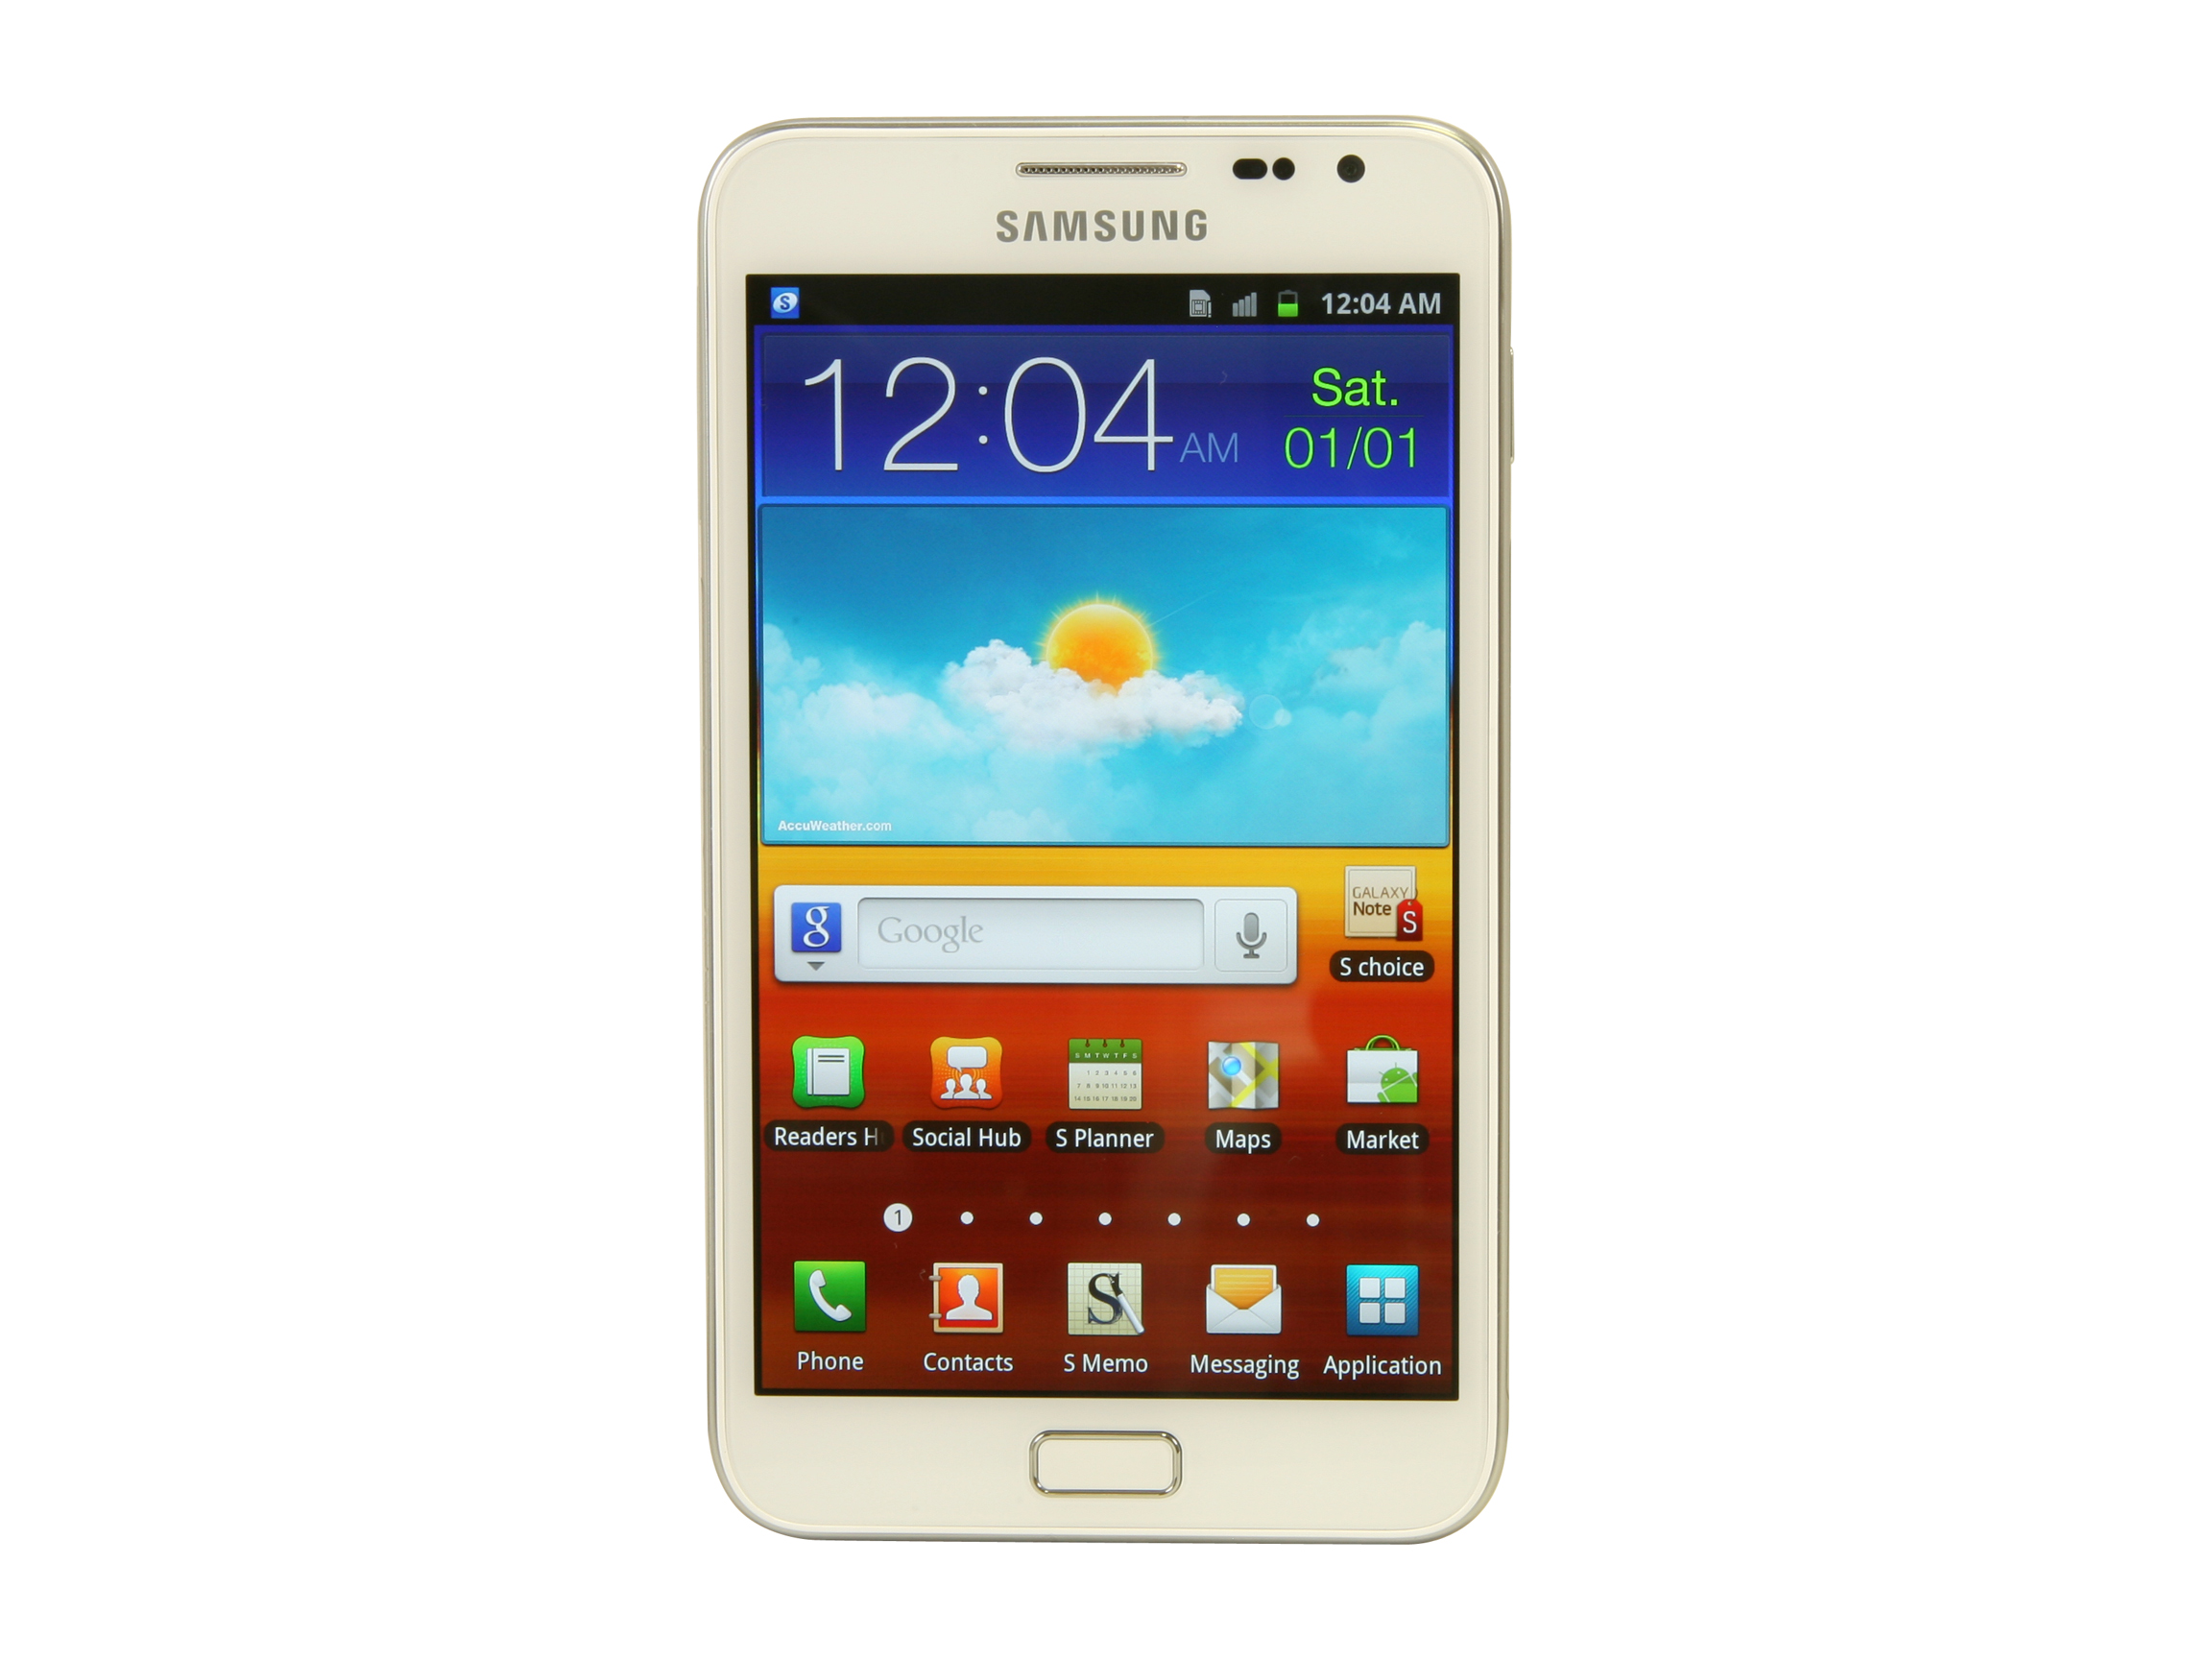 Samsung Galaxy Note 16GB White 3G Unlocked GSM Smart Phone w/ Android OS 2.3 / 8 MP Camera (N7000)